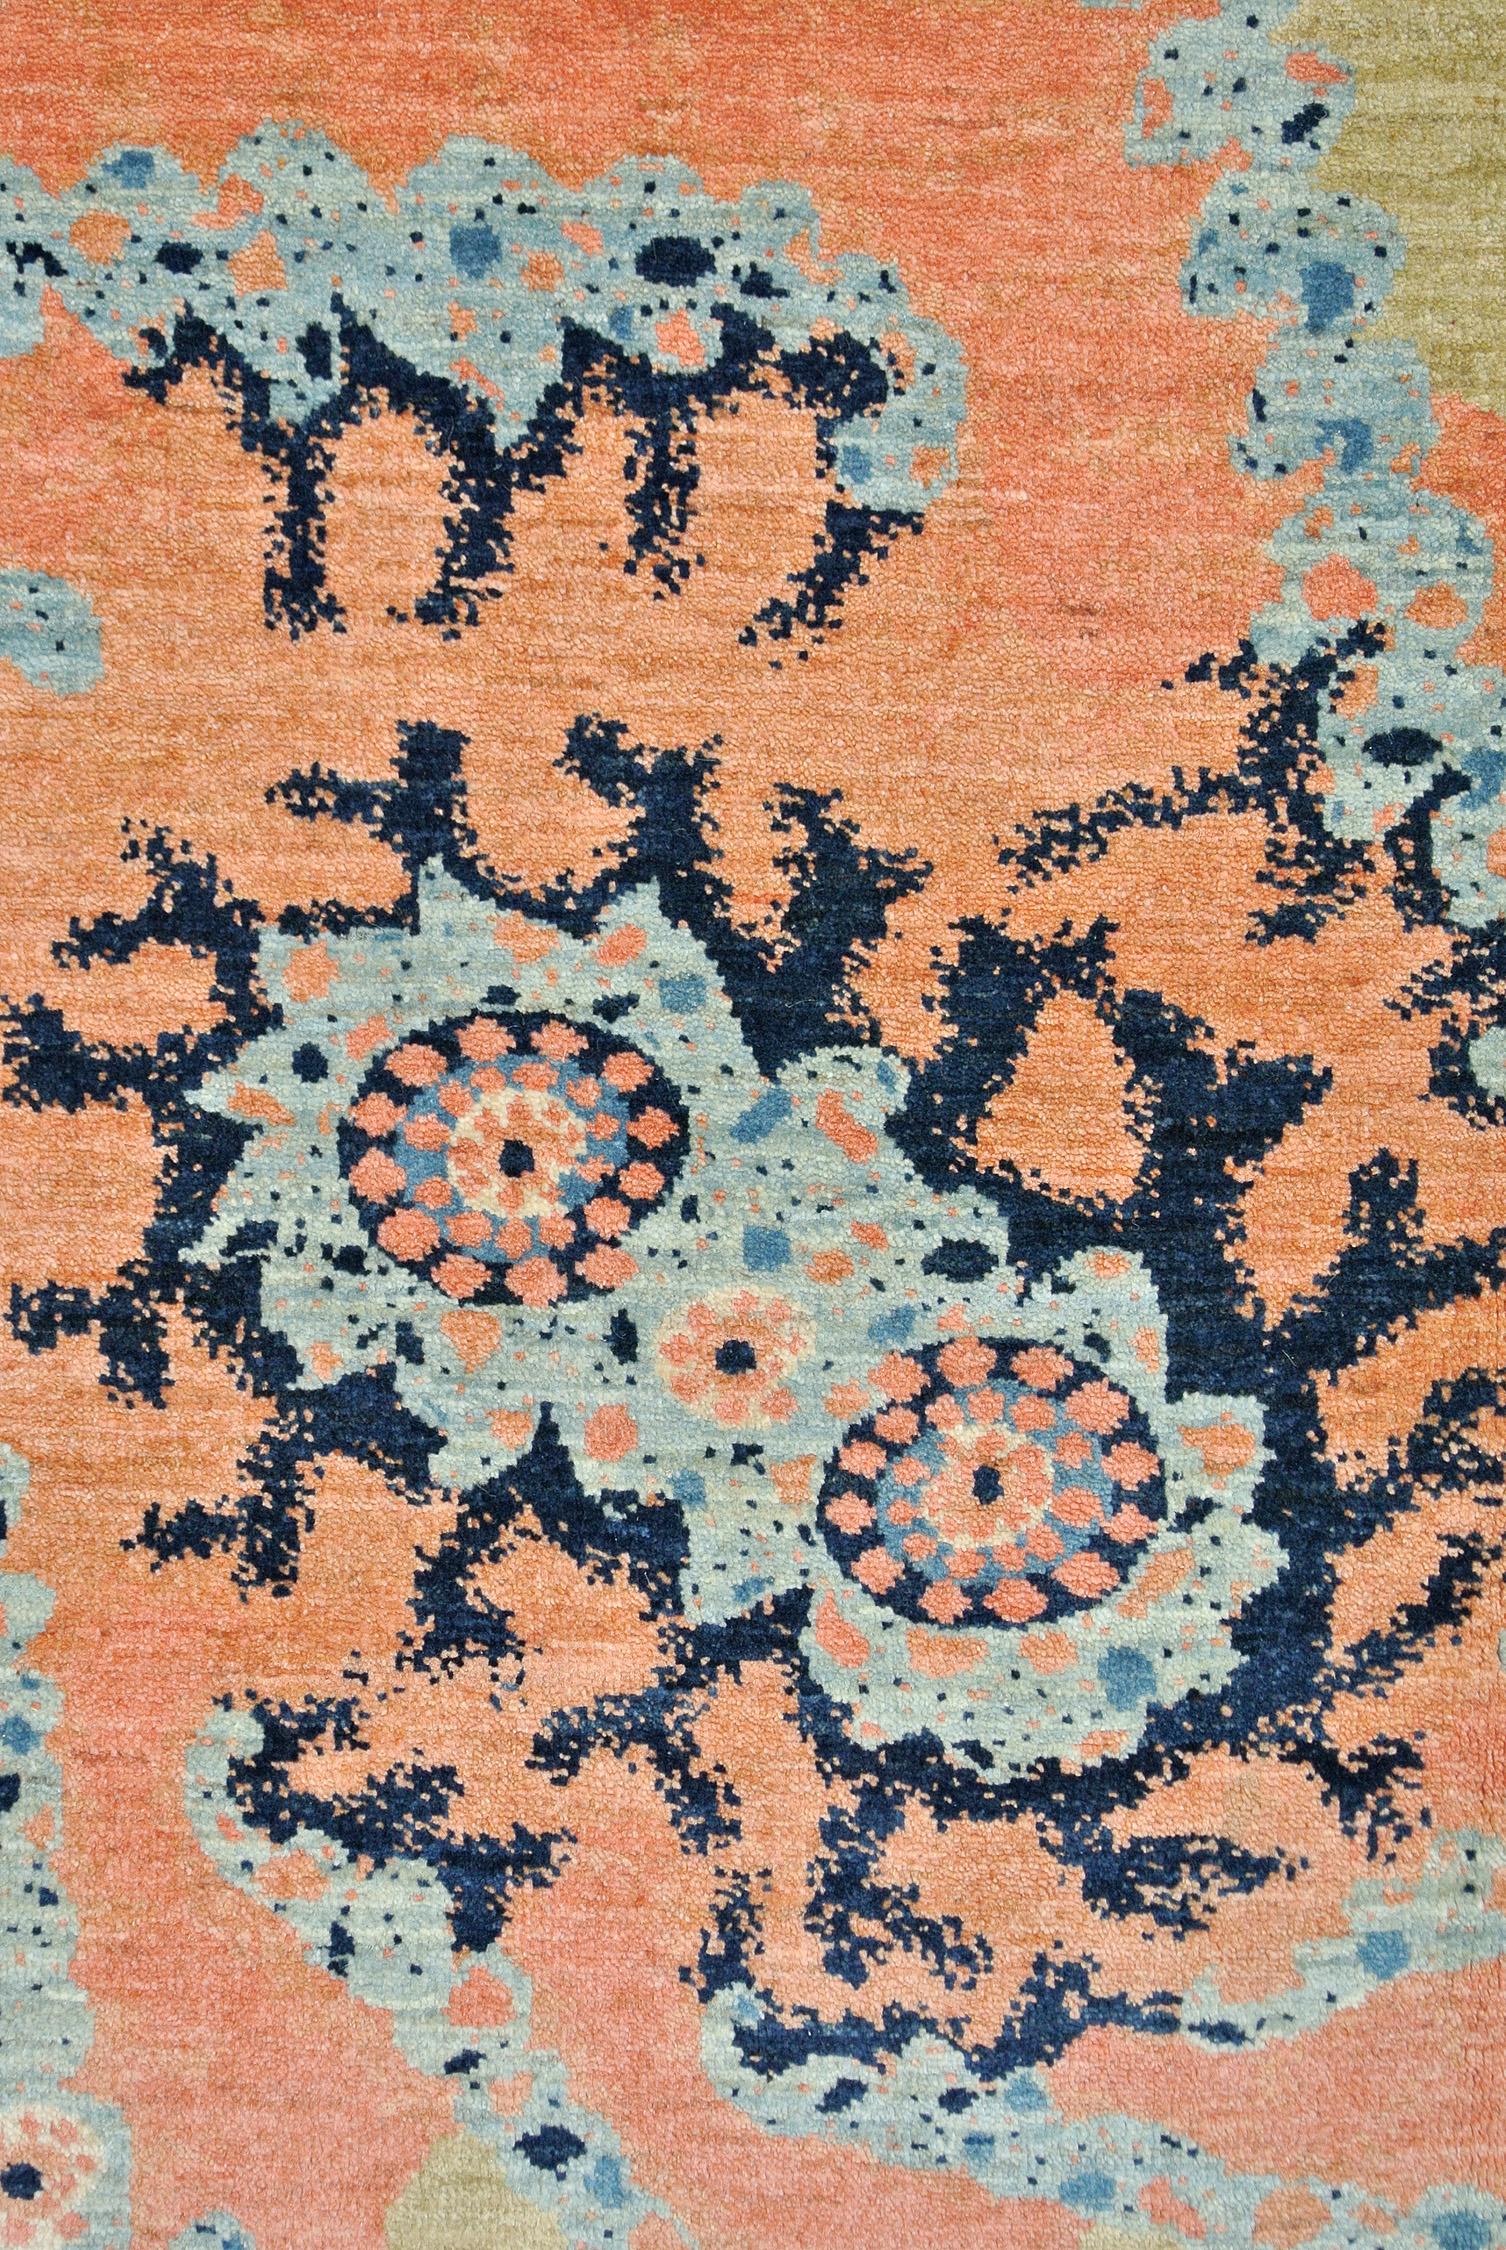 orley shabahang persian and oriental rugs